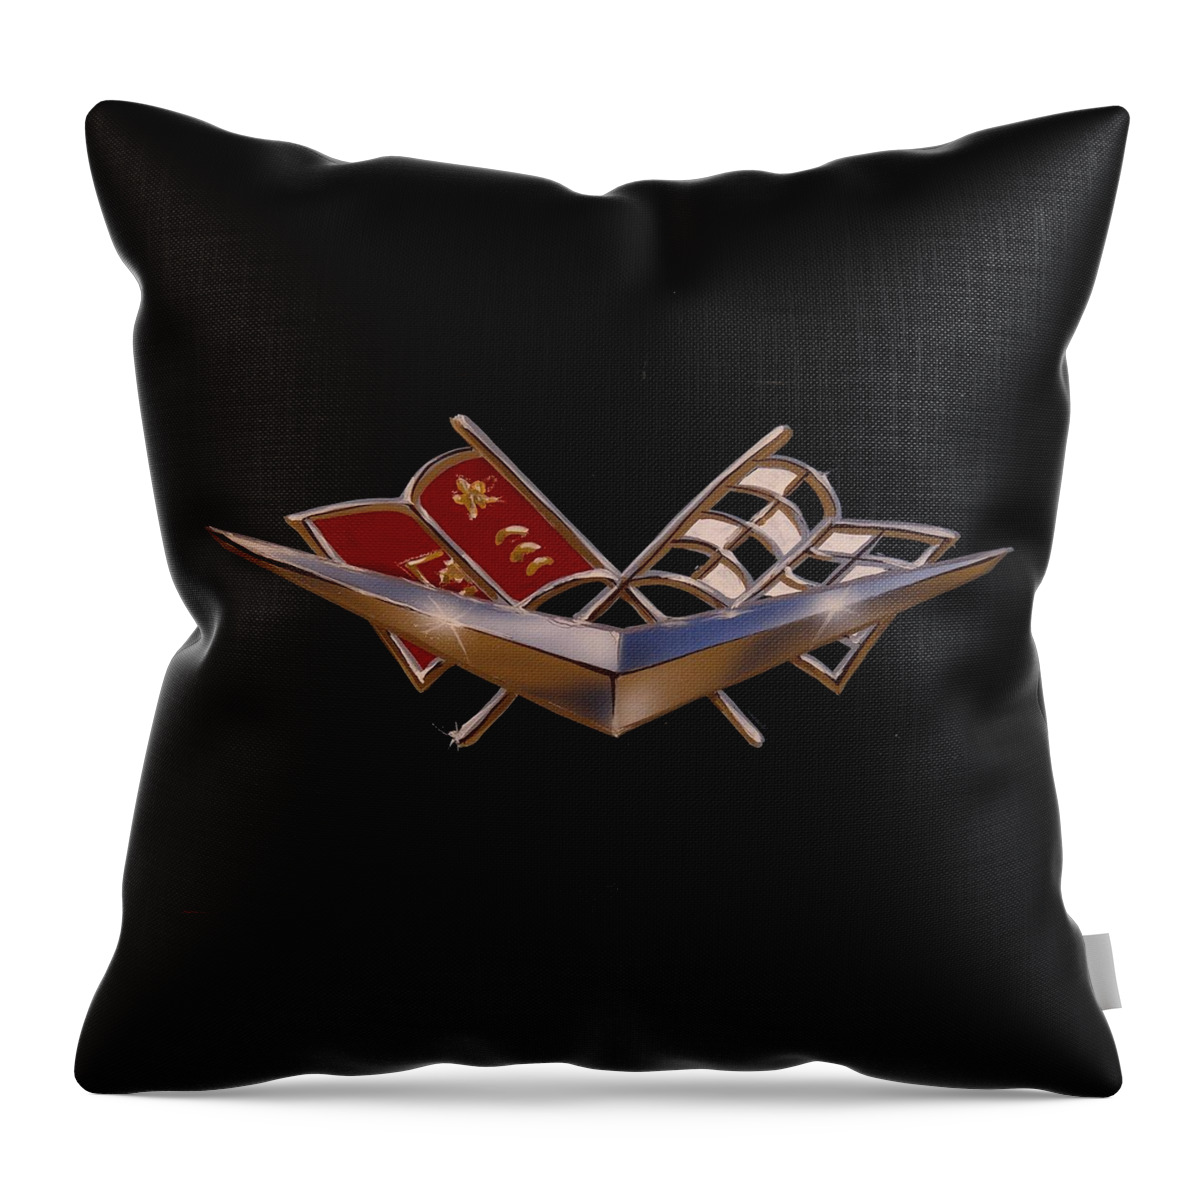 Chevy Throw Pillow featuring the painting Chevy Flags by Alan Johnson